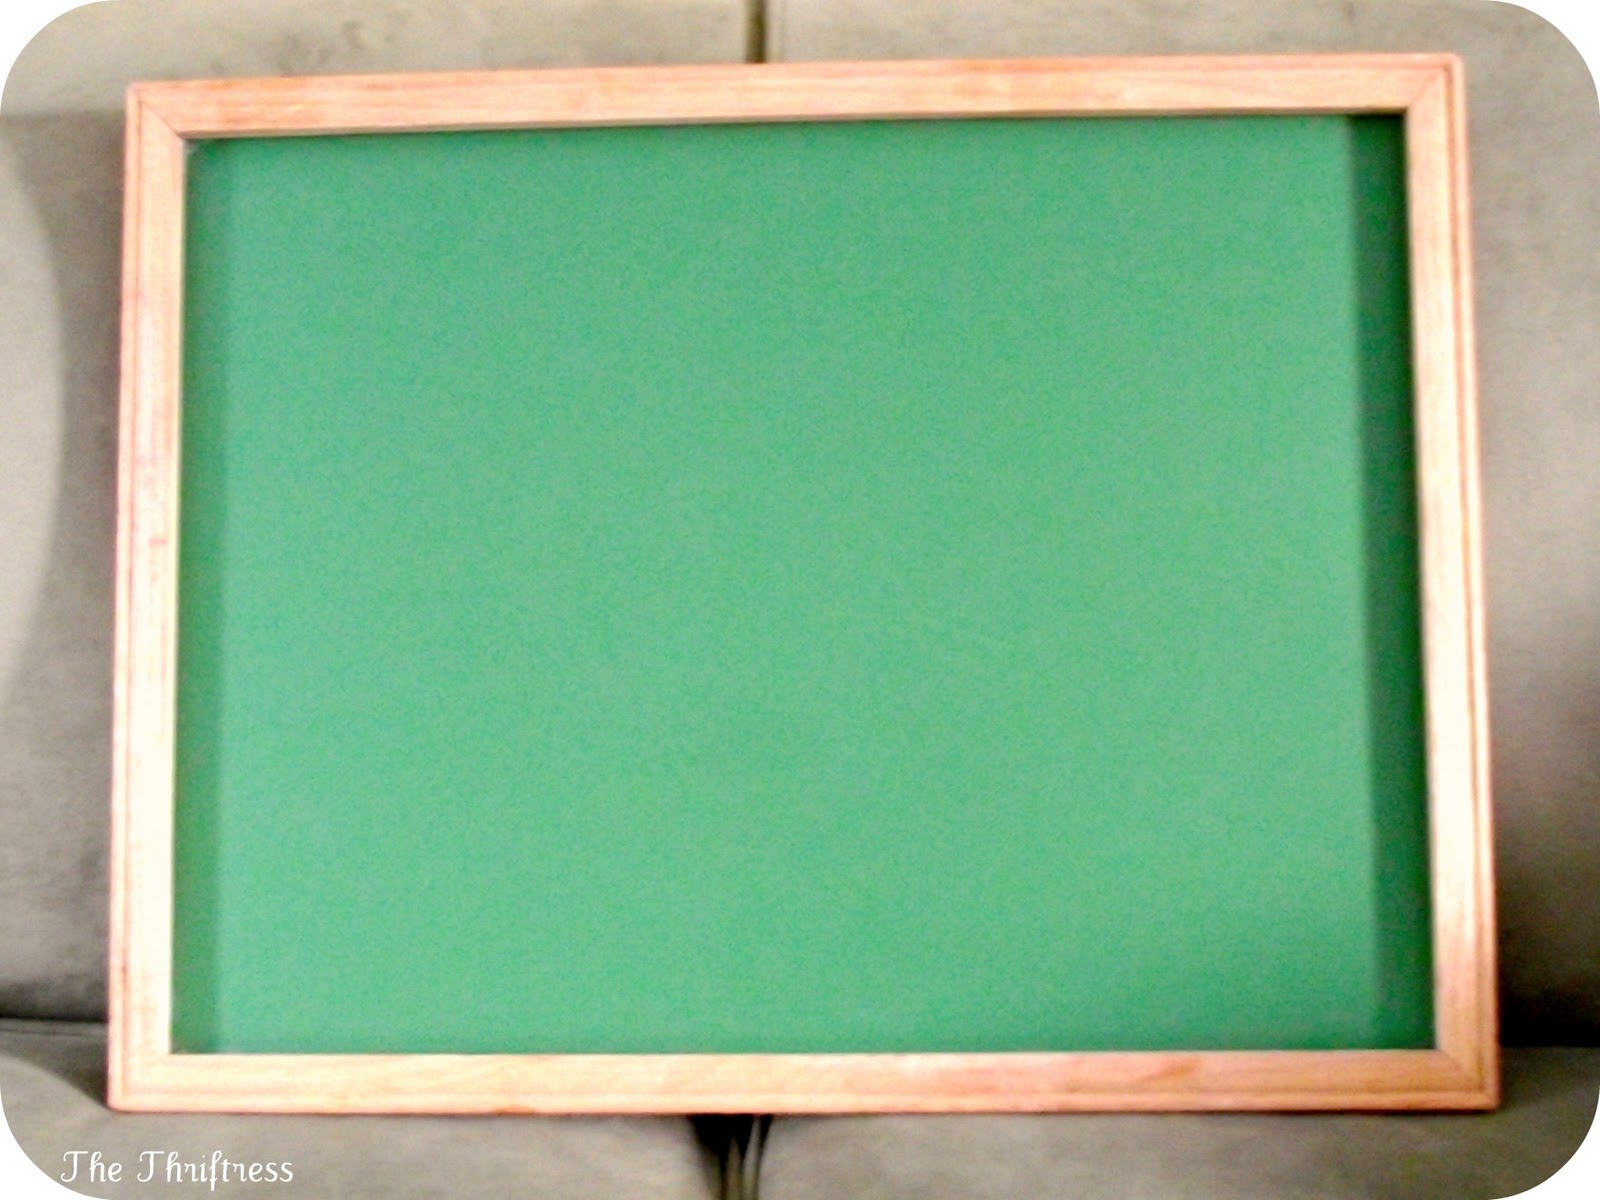 Pictures Of Chalkboards - ClipArt Best